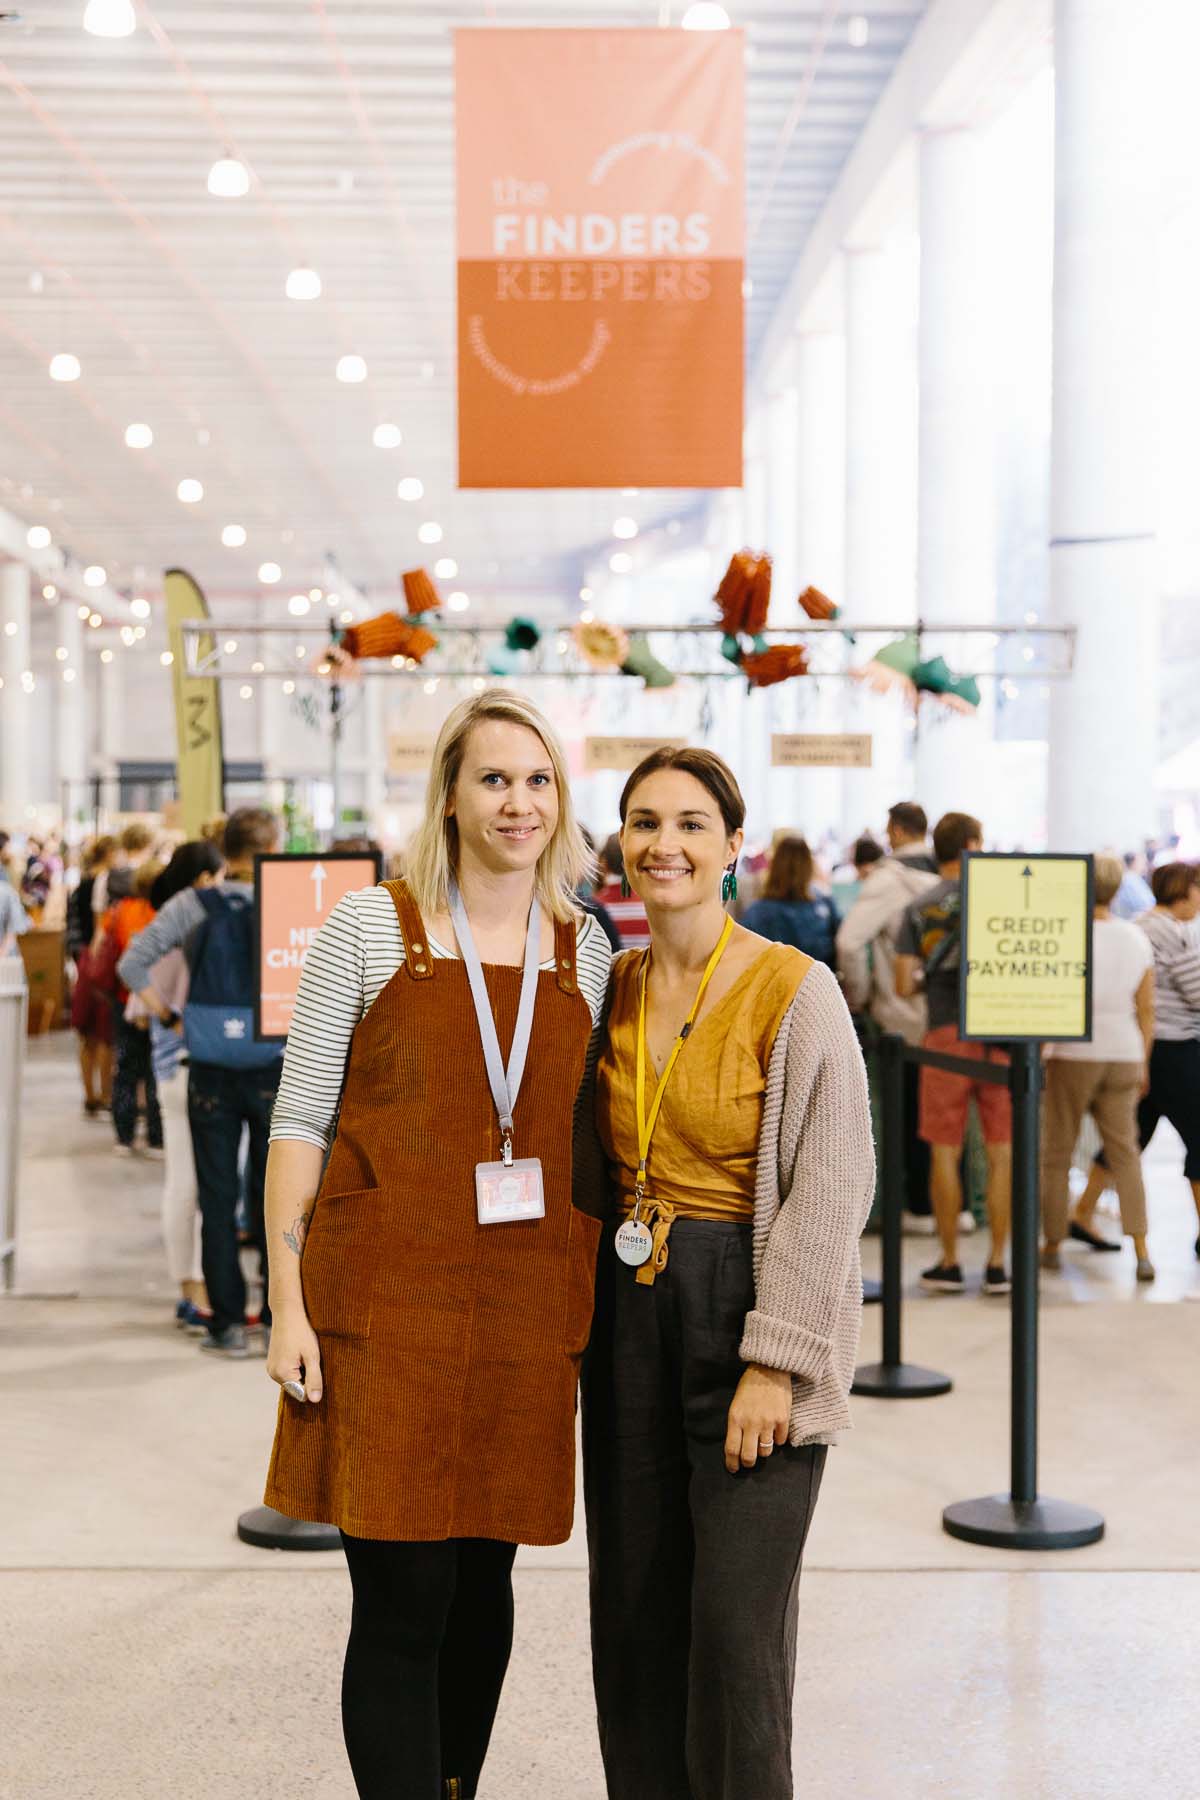 Portrait of The Finders Keepers Market founders Sarah and Brooke